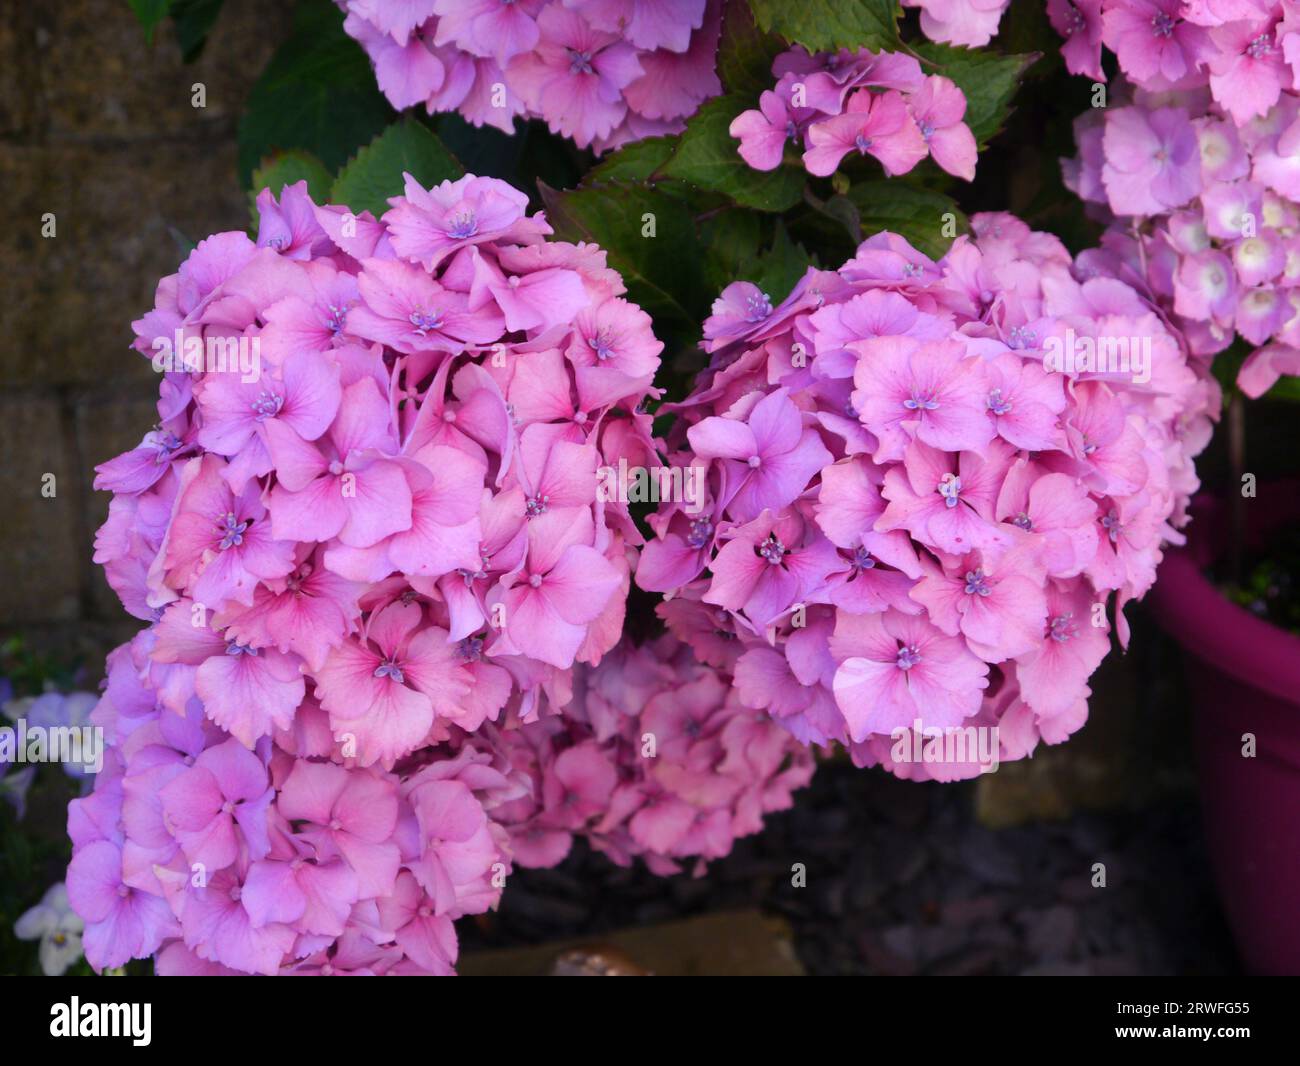 Large Conical-shaped Mauve/Lilac Hydrangea Macrophylla Flowerheads grown in an English Cottage Garden, Lancashire, England, UK. Stock Photo